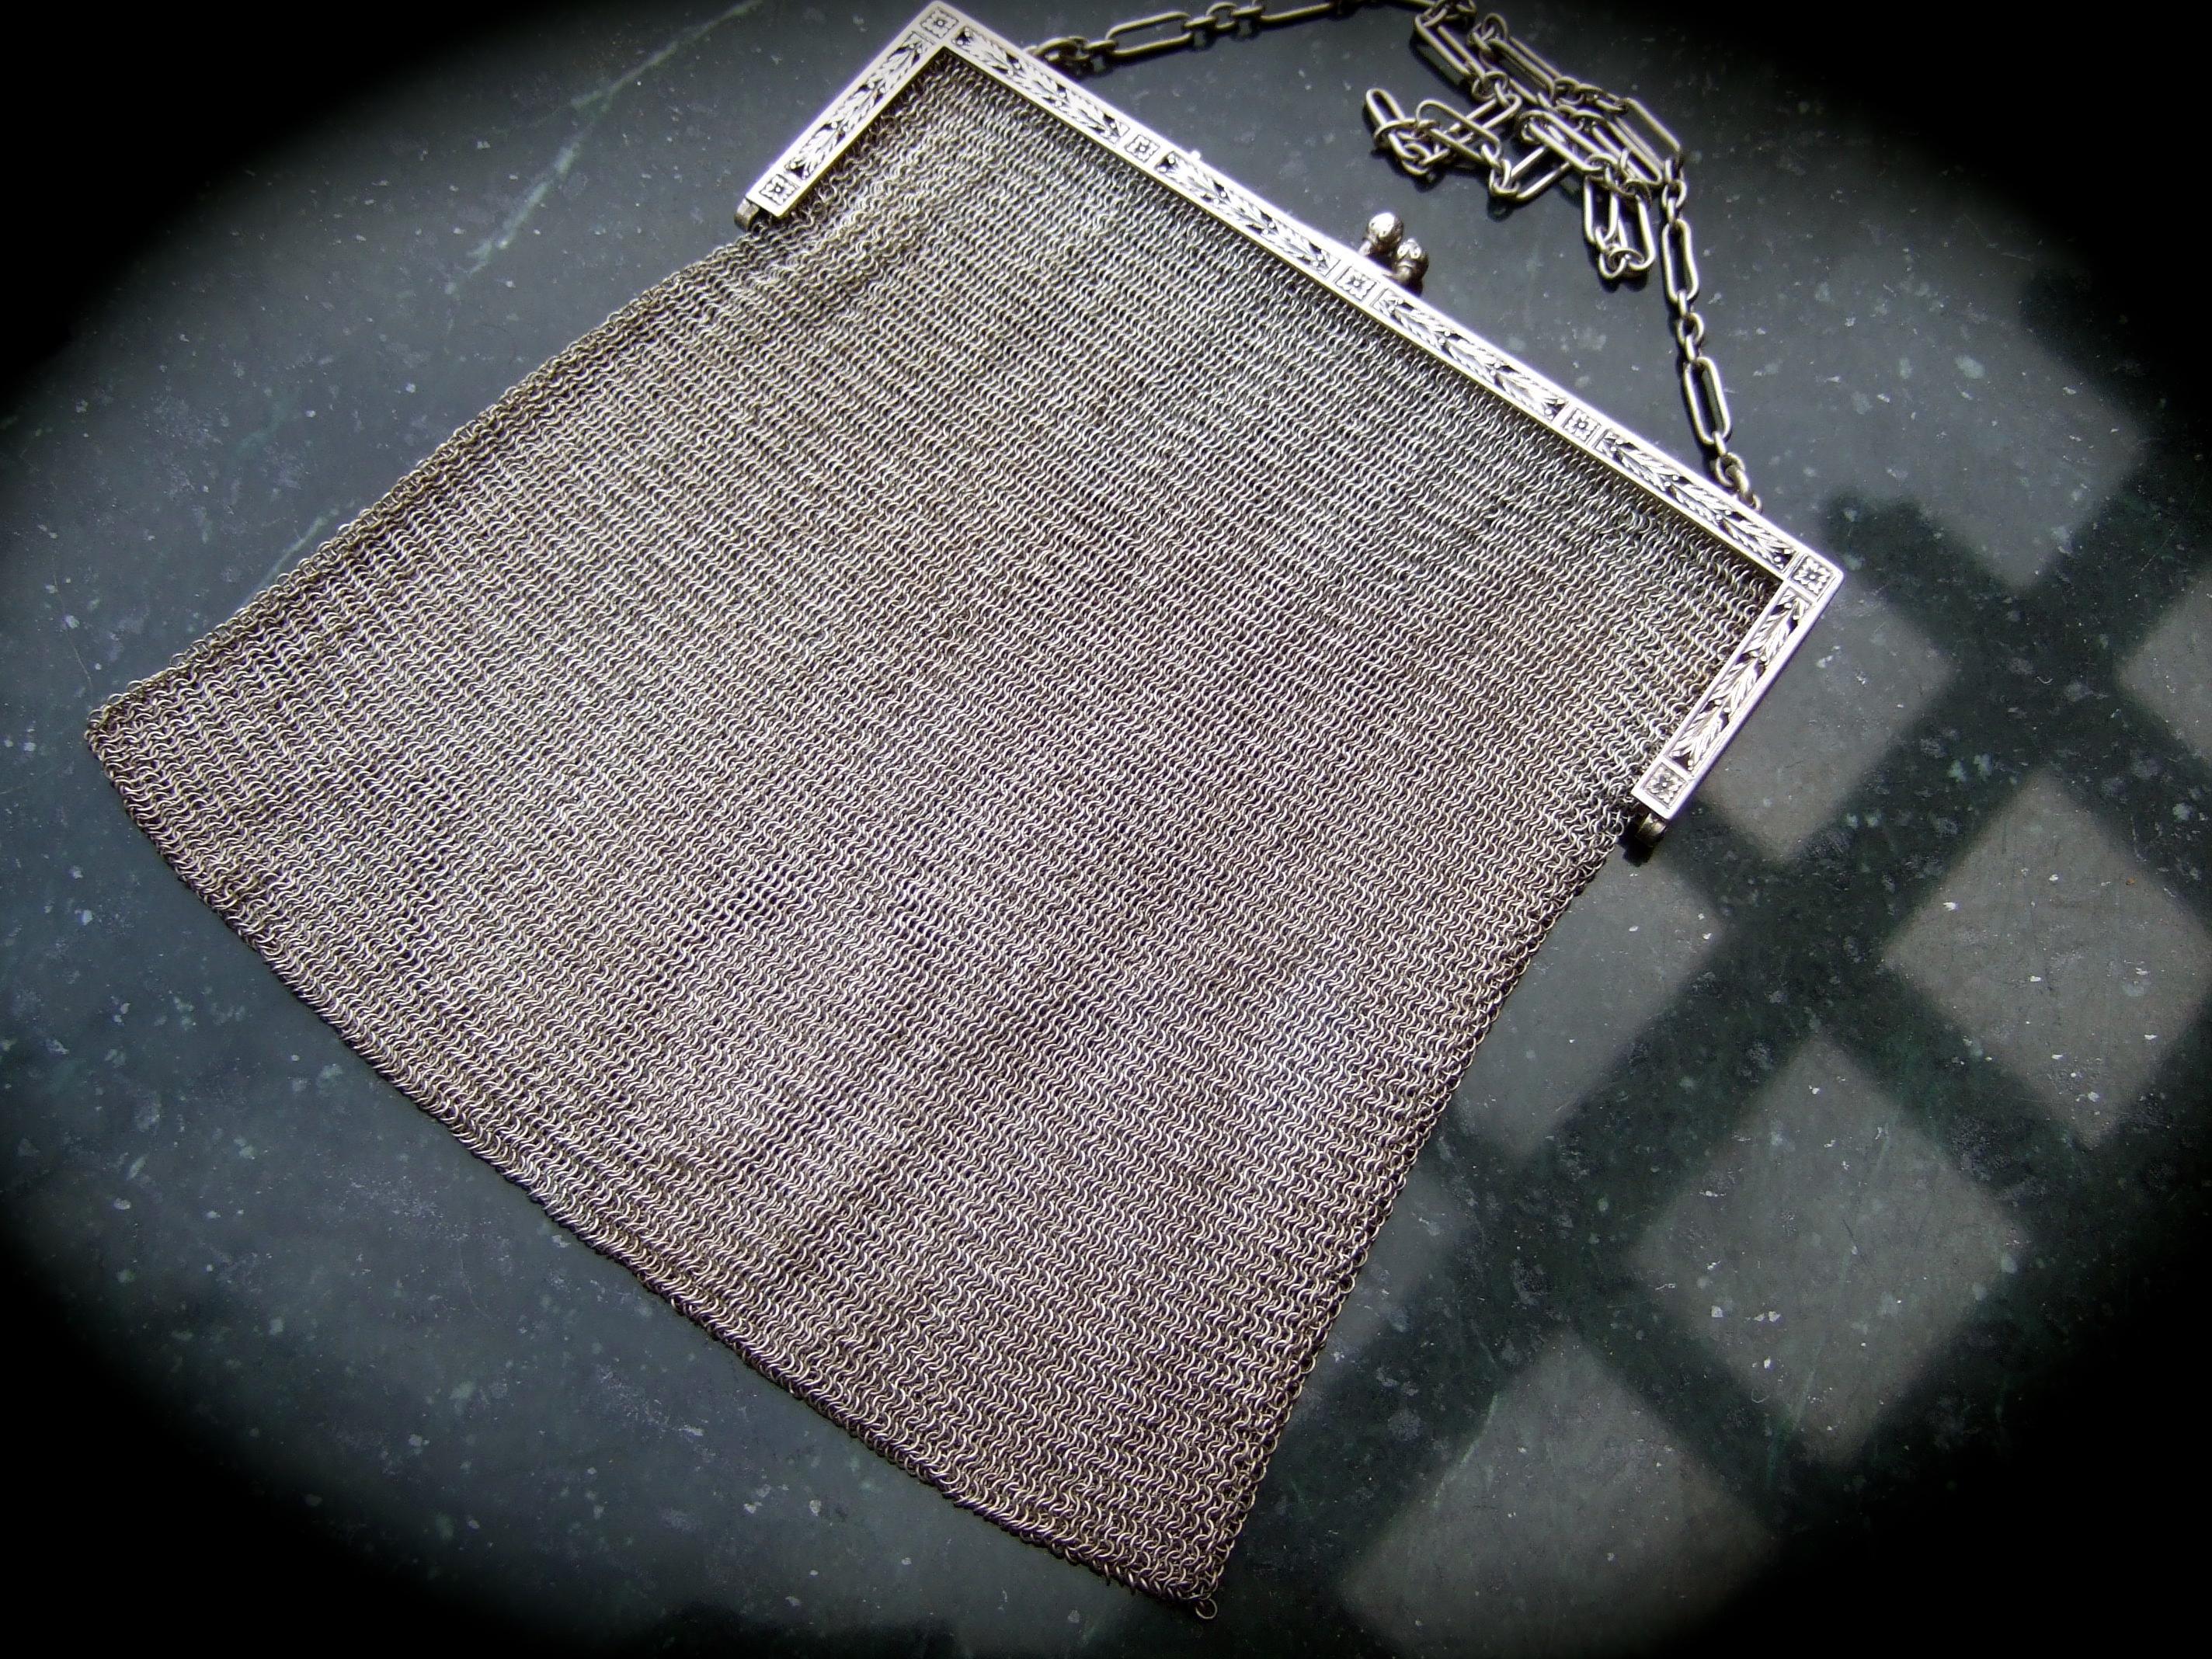 Tiffany & Co. Rare Sterling Silver Chain Mail Evening Bag c 1910 2